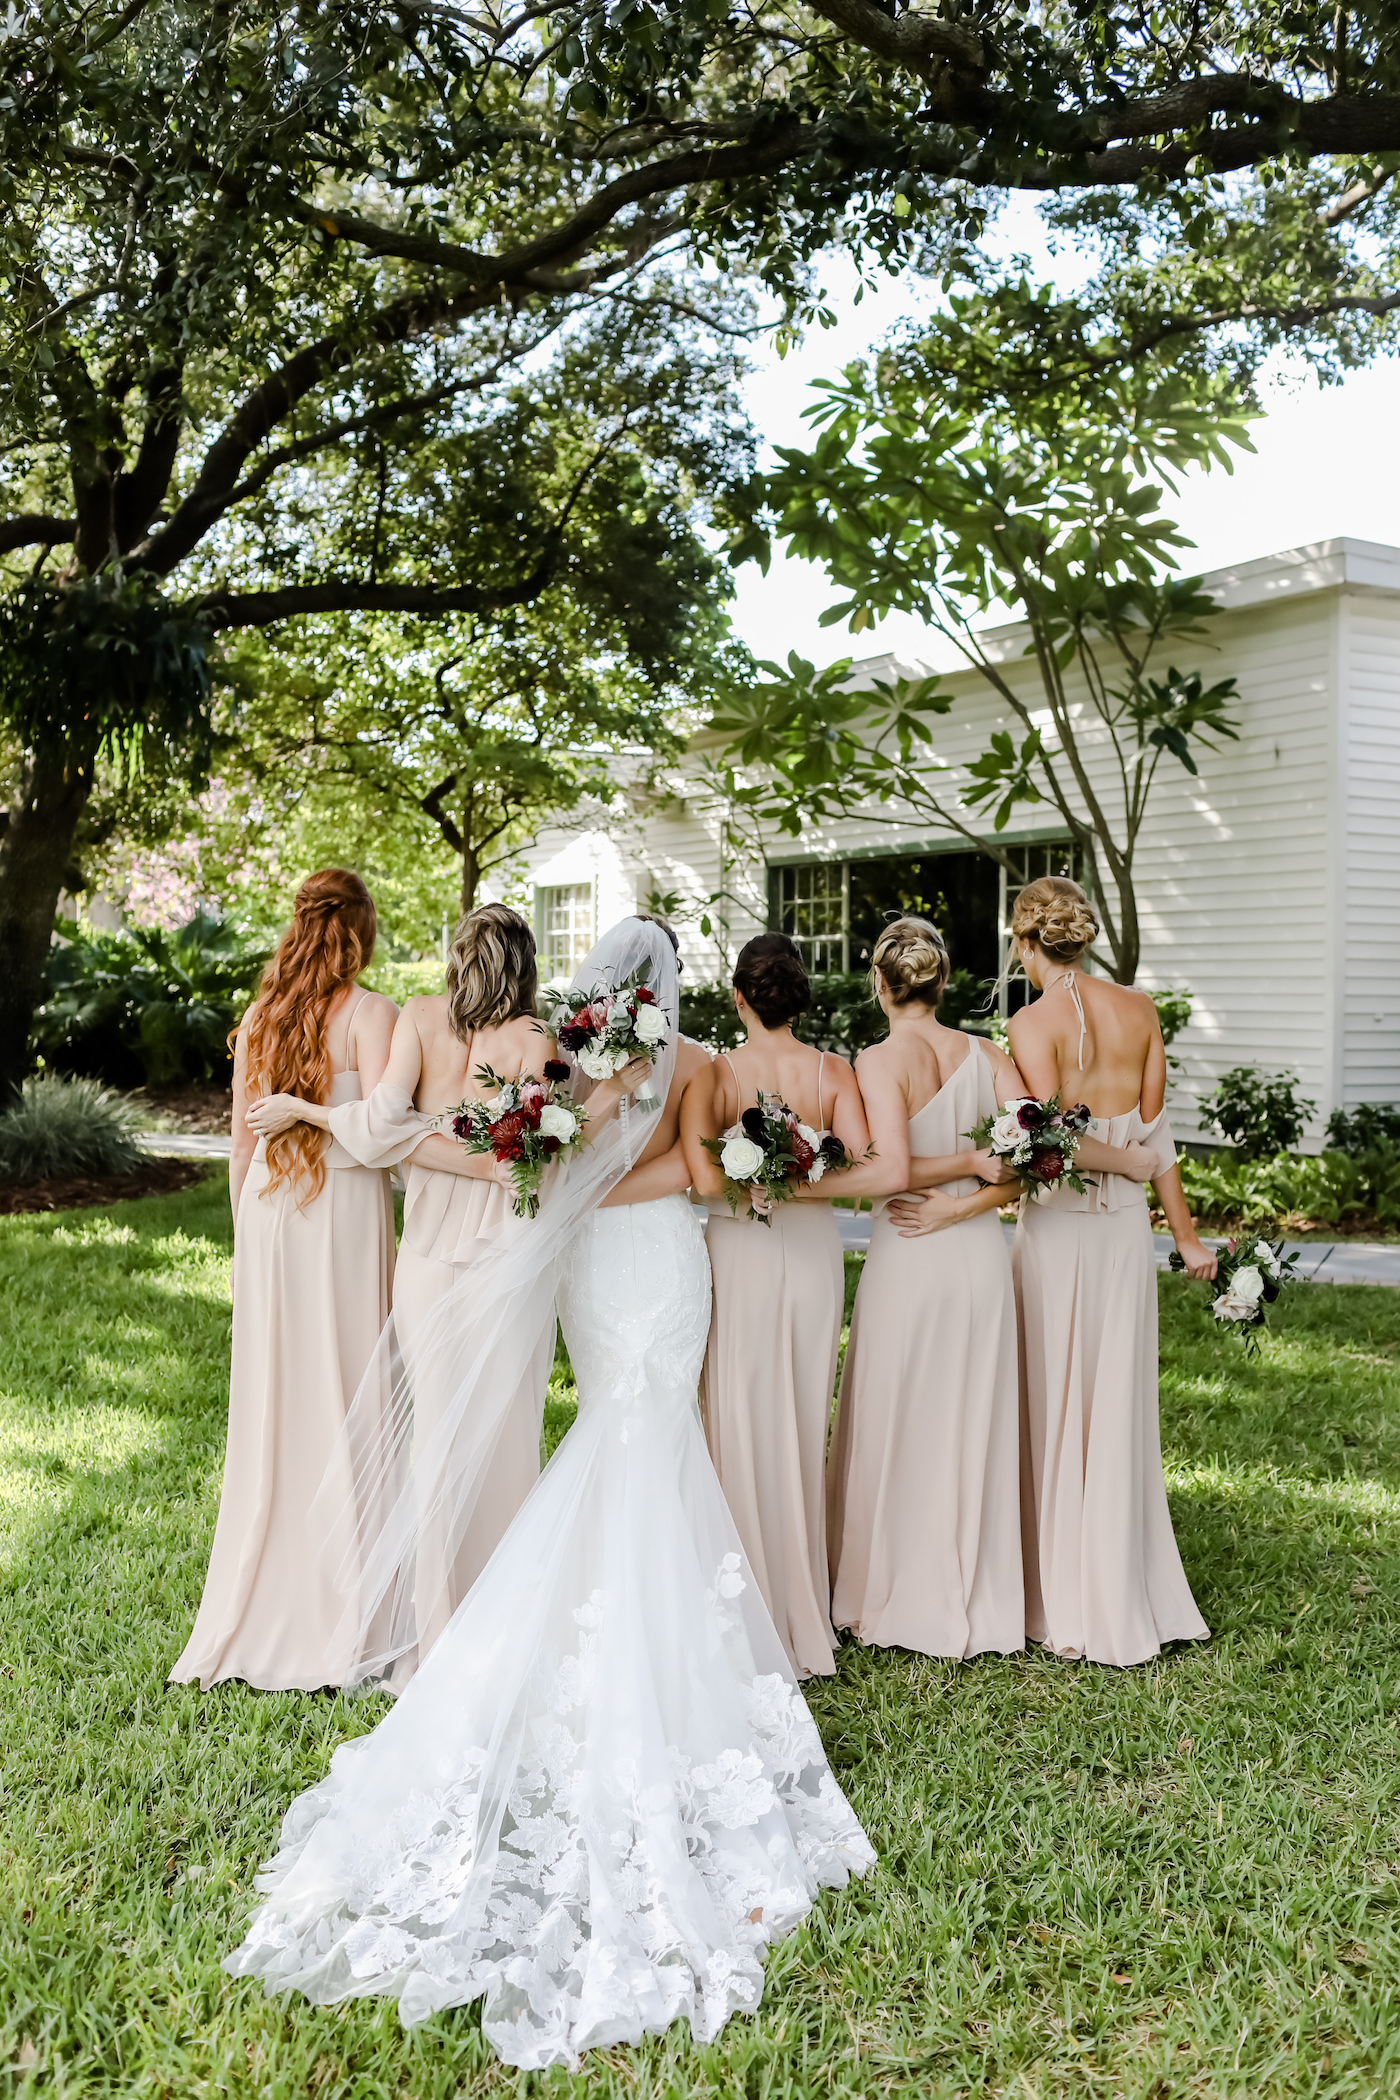 Bride in Lace Wedding Dress with Bridesmaids in Neutral Nude Dresses | Tampa Wedding Planner Blue Skies Weddings and Events | Wedding Photographer Lifelong Photography Studio | Bridesmaids Dress Shop Bella Bridesmaids